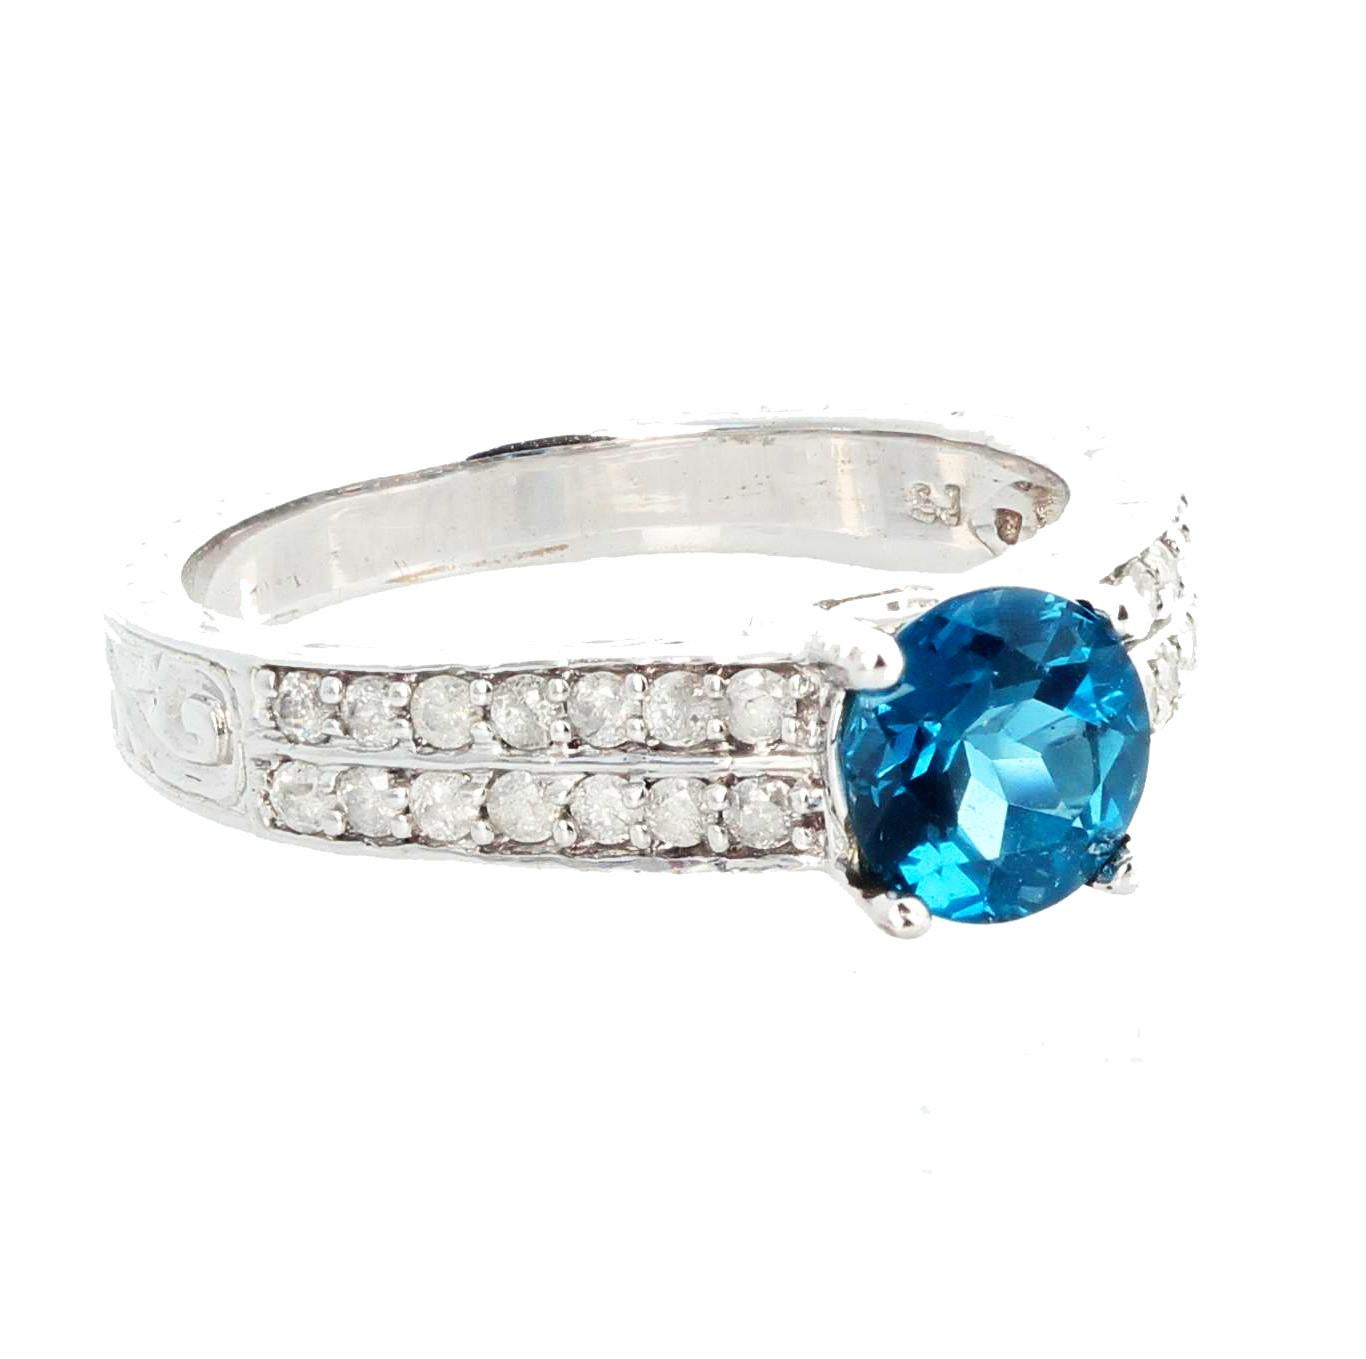 Beautiful gracious glittering blue Topaz - 1.3 carats - 6.5 mm -  set in a 10kt white gold ring size 7.5 (sizable FOR FREE). This gemstone sparkles invitingly and the ring is sizable.  This is really beautiful for wonderful occasions. 